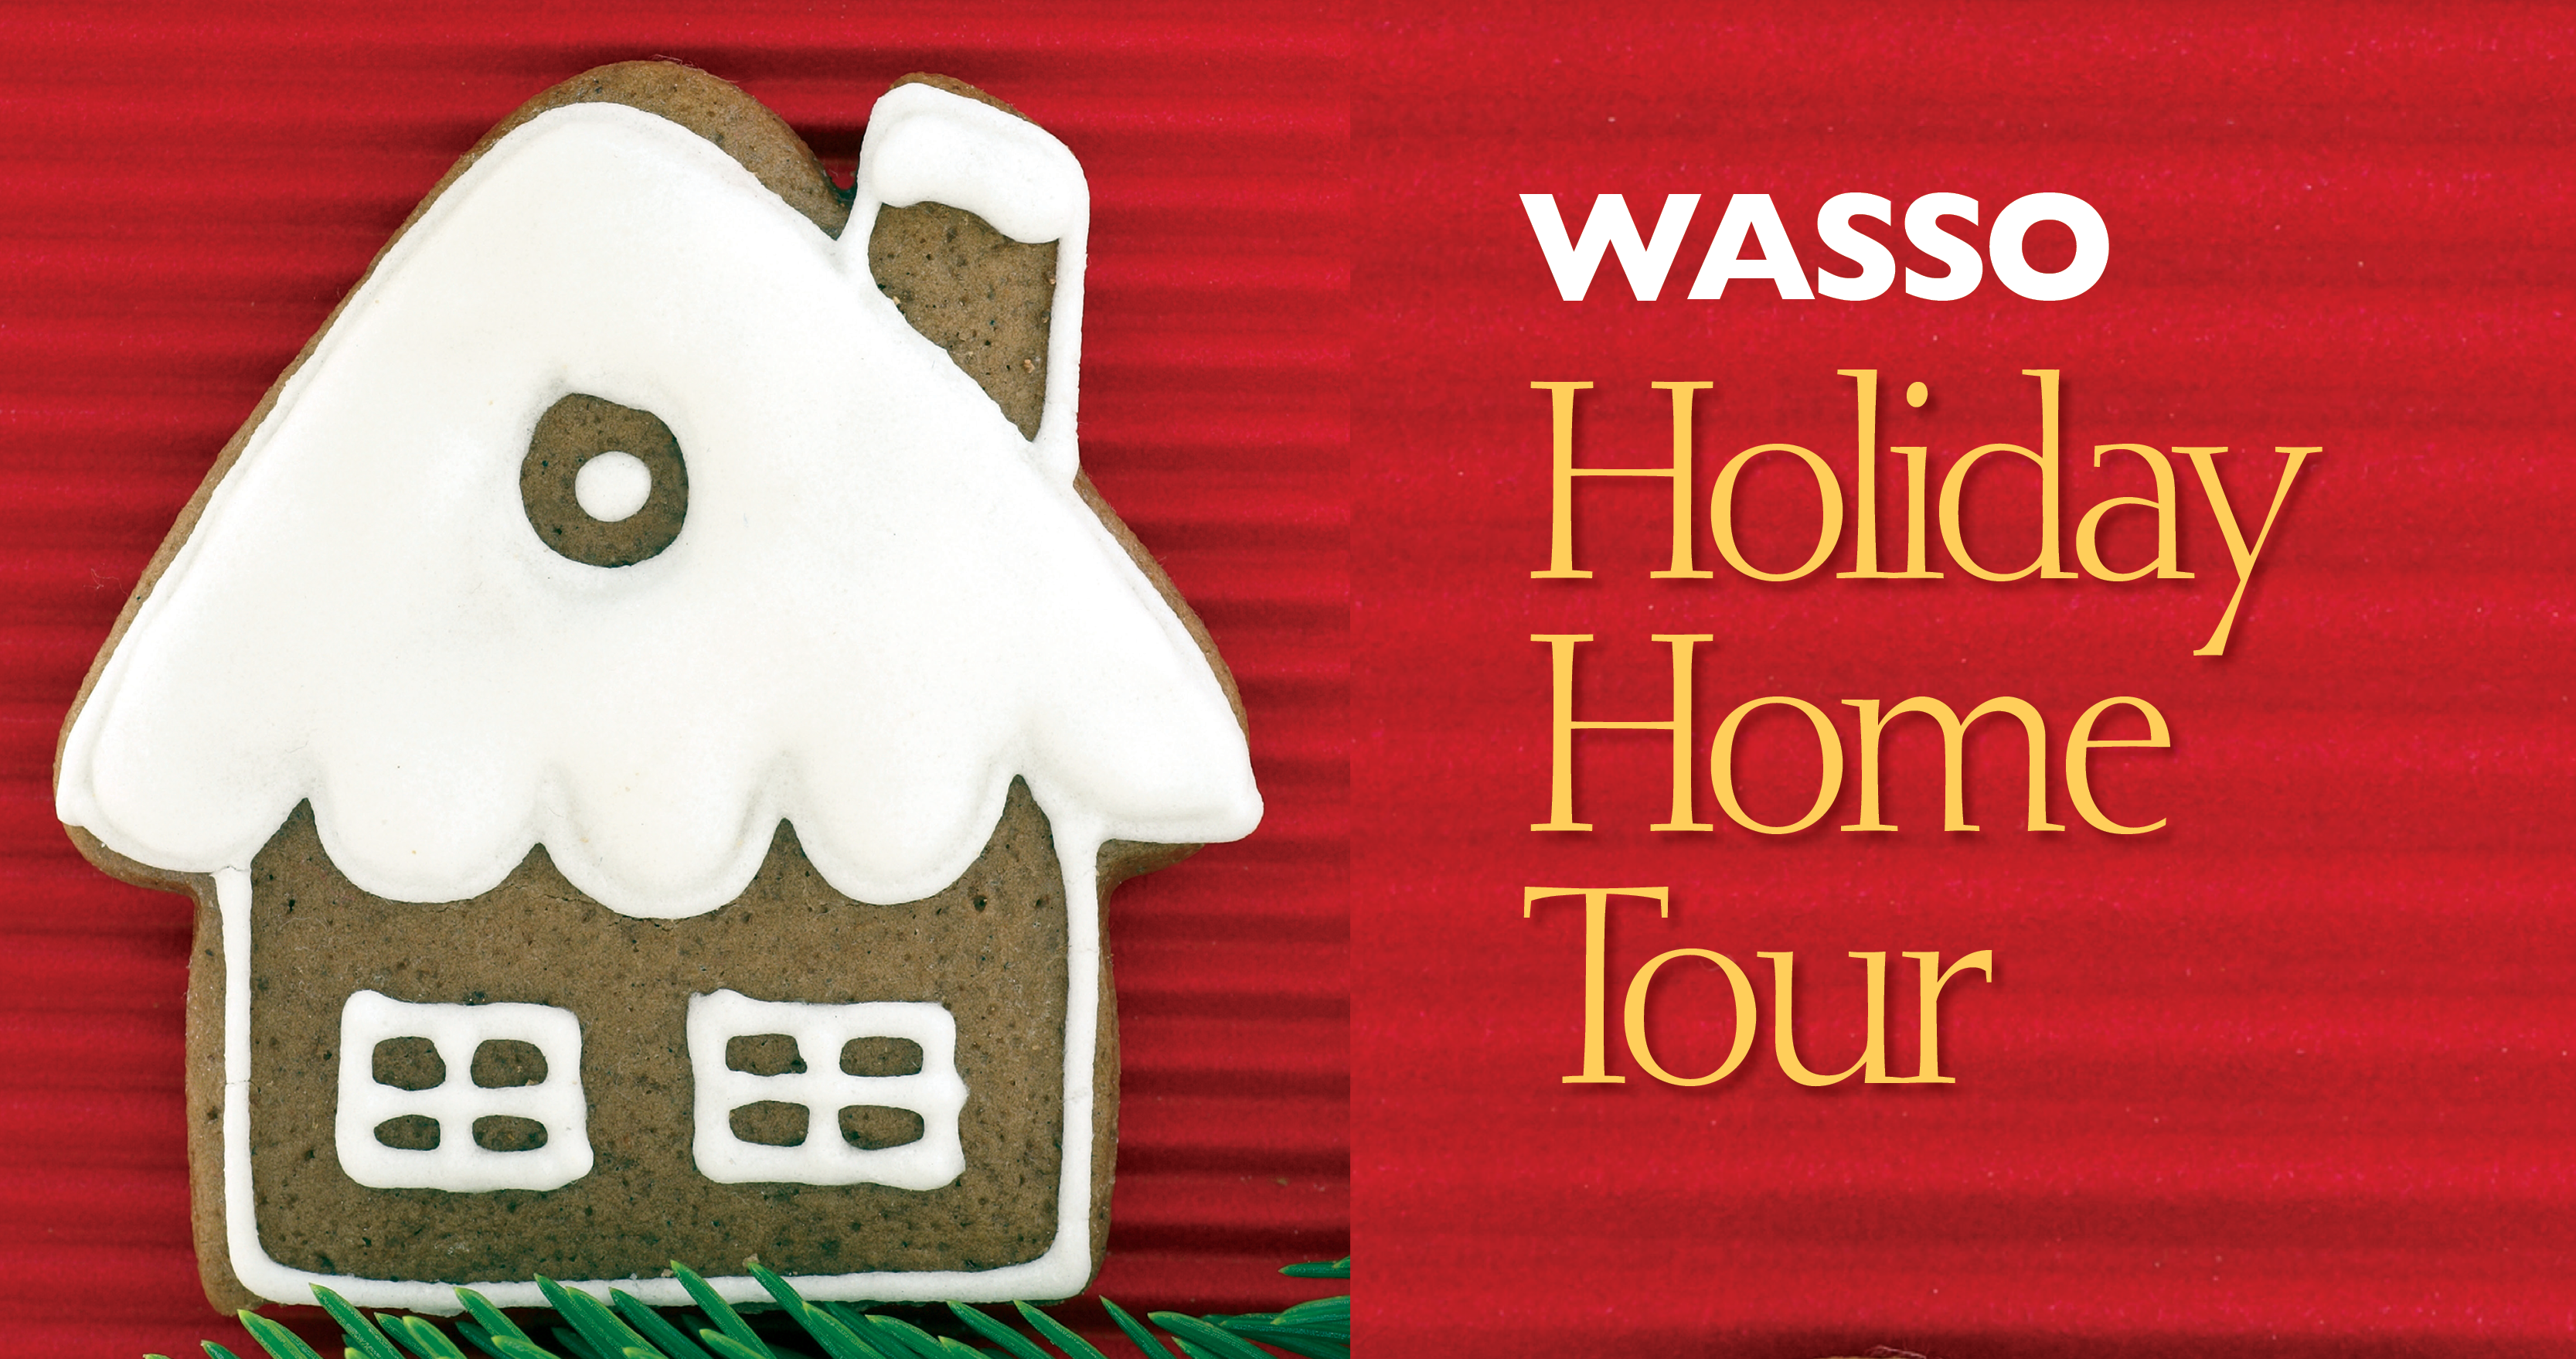 Festive gingerbread house cookie on red background with "WASSO Holiday Home Tour" text